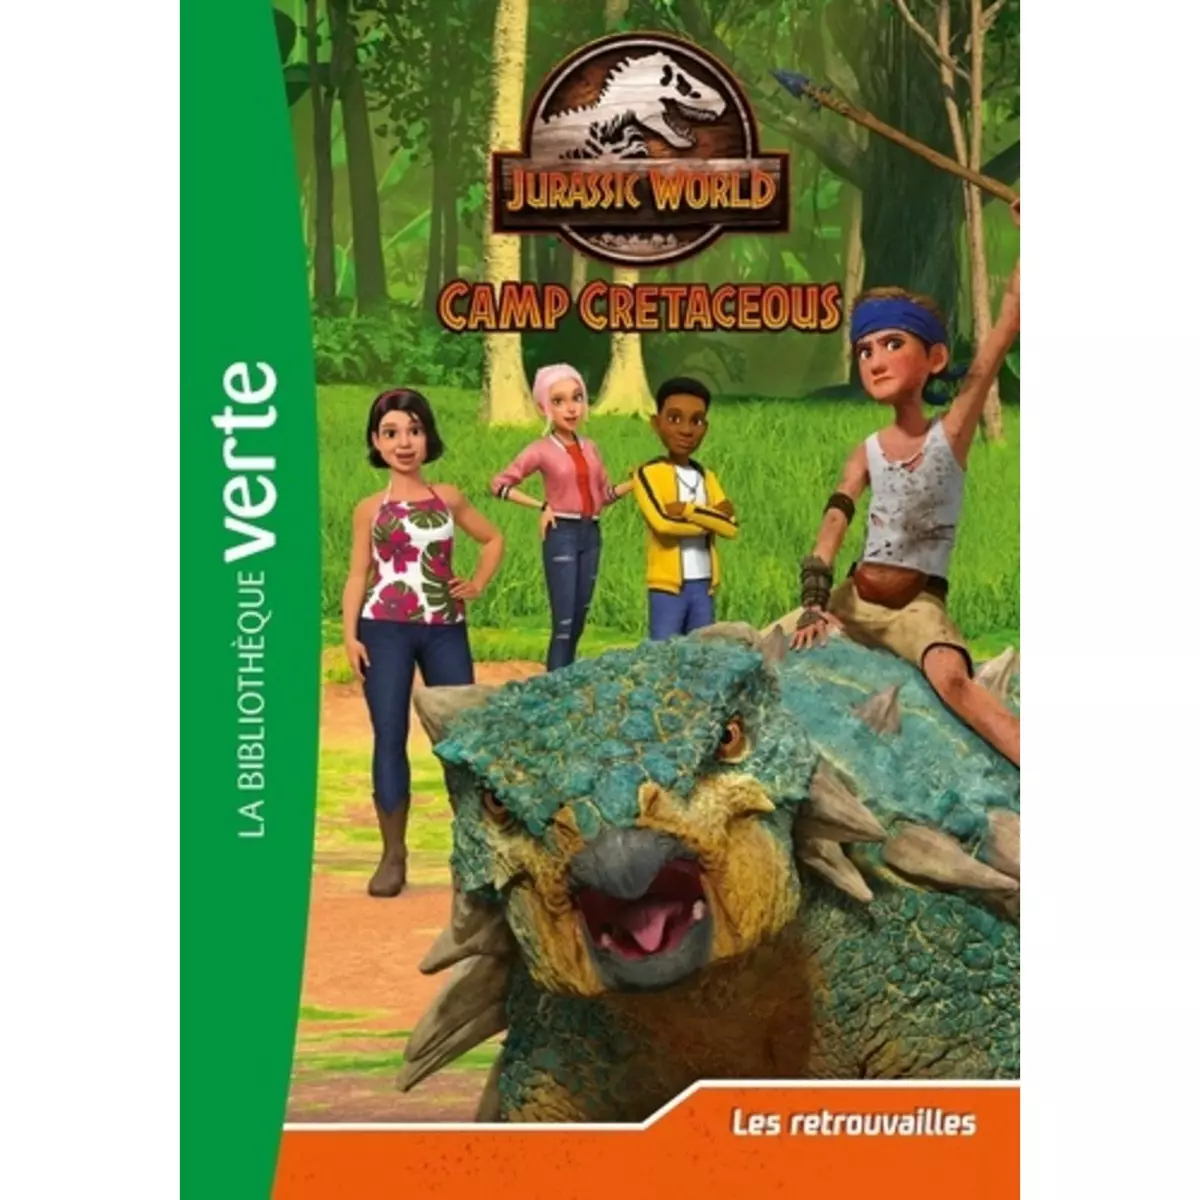  JURASSIC WORLD CAMP CRETACEOUS TOME 7 : LES RETROUVAILLES, Gay Olivier